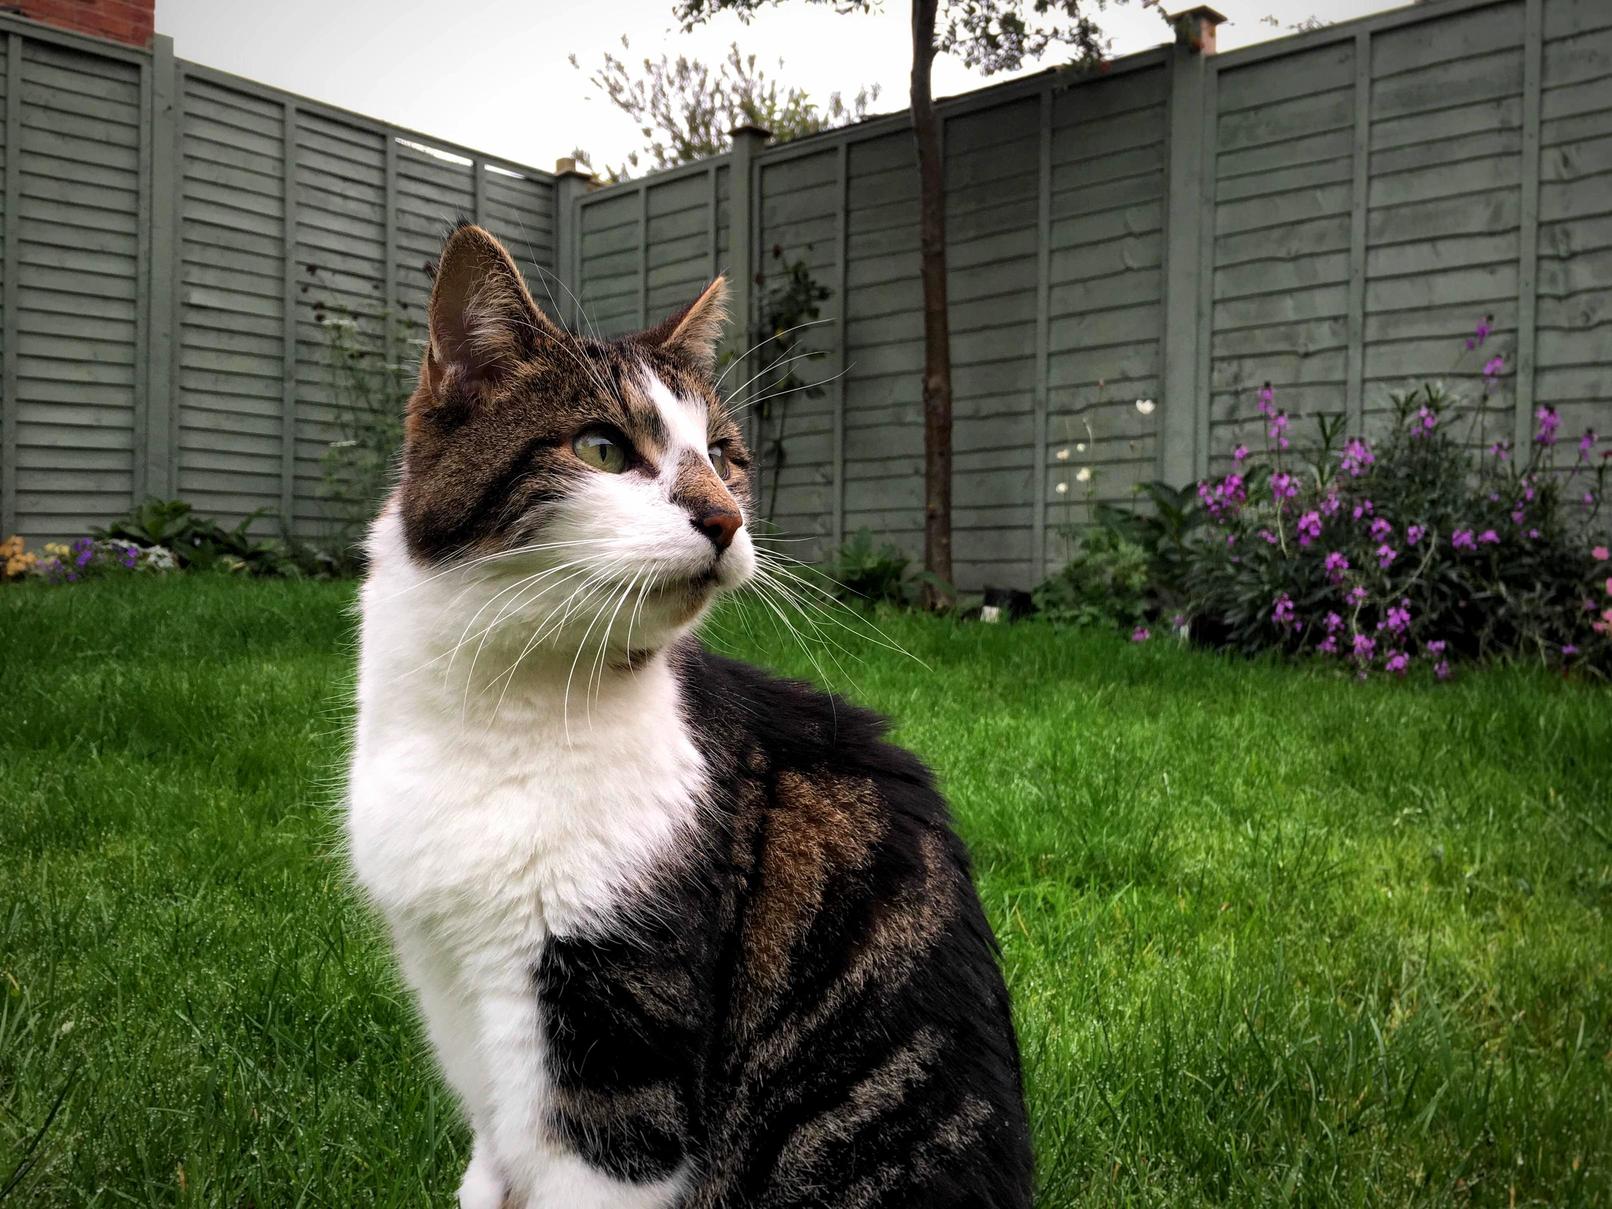 Mo update 3 – he was able to go out into the garden today but it could be one of his last days with us